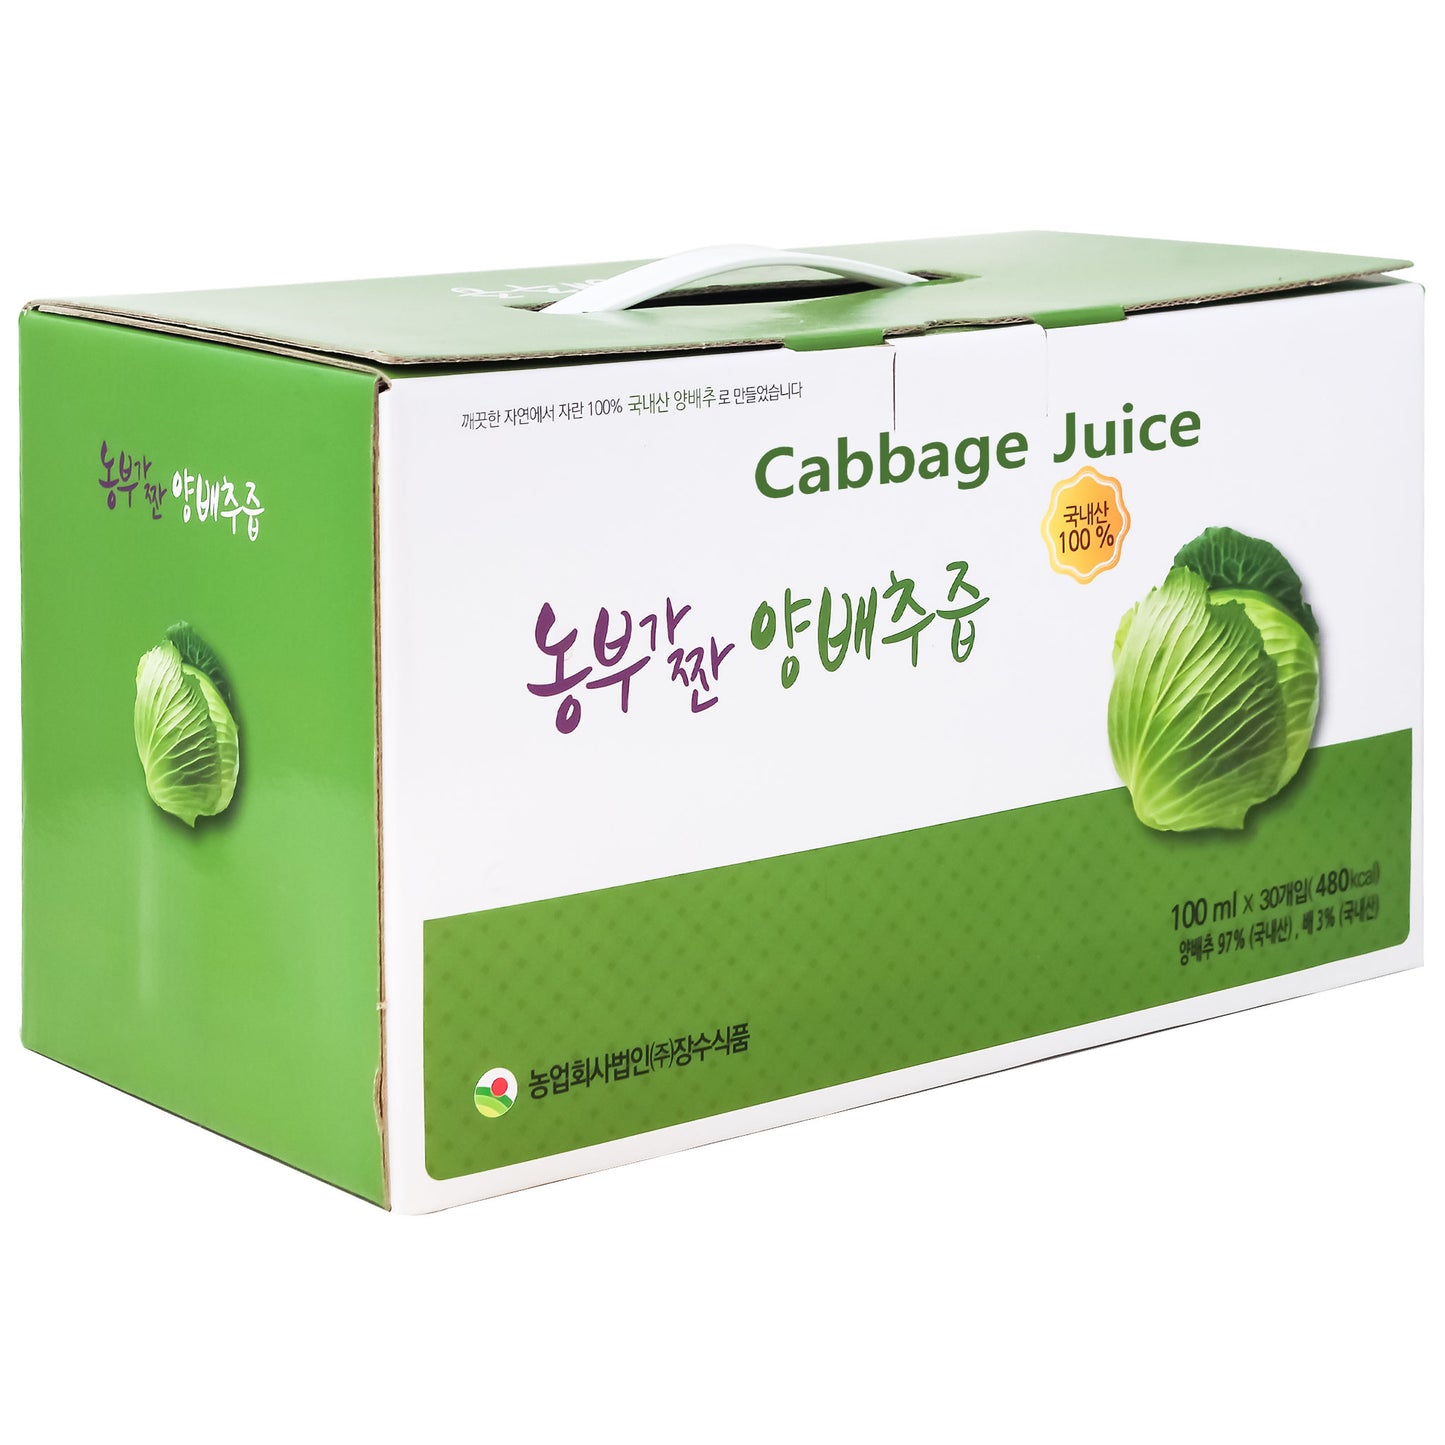 Farmers Cabbage and Pear Juice, 3.4 oz per Pack, 30 Packs 1 order 양배추 배즙